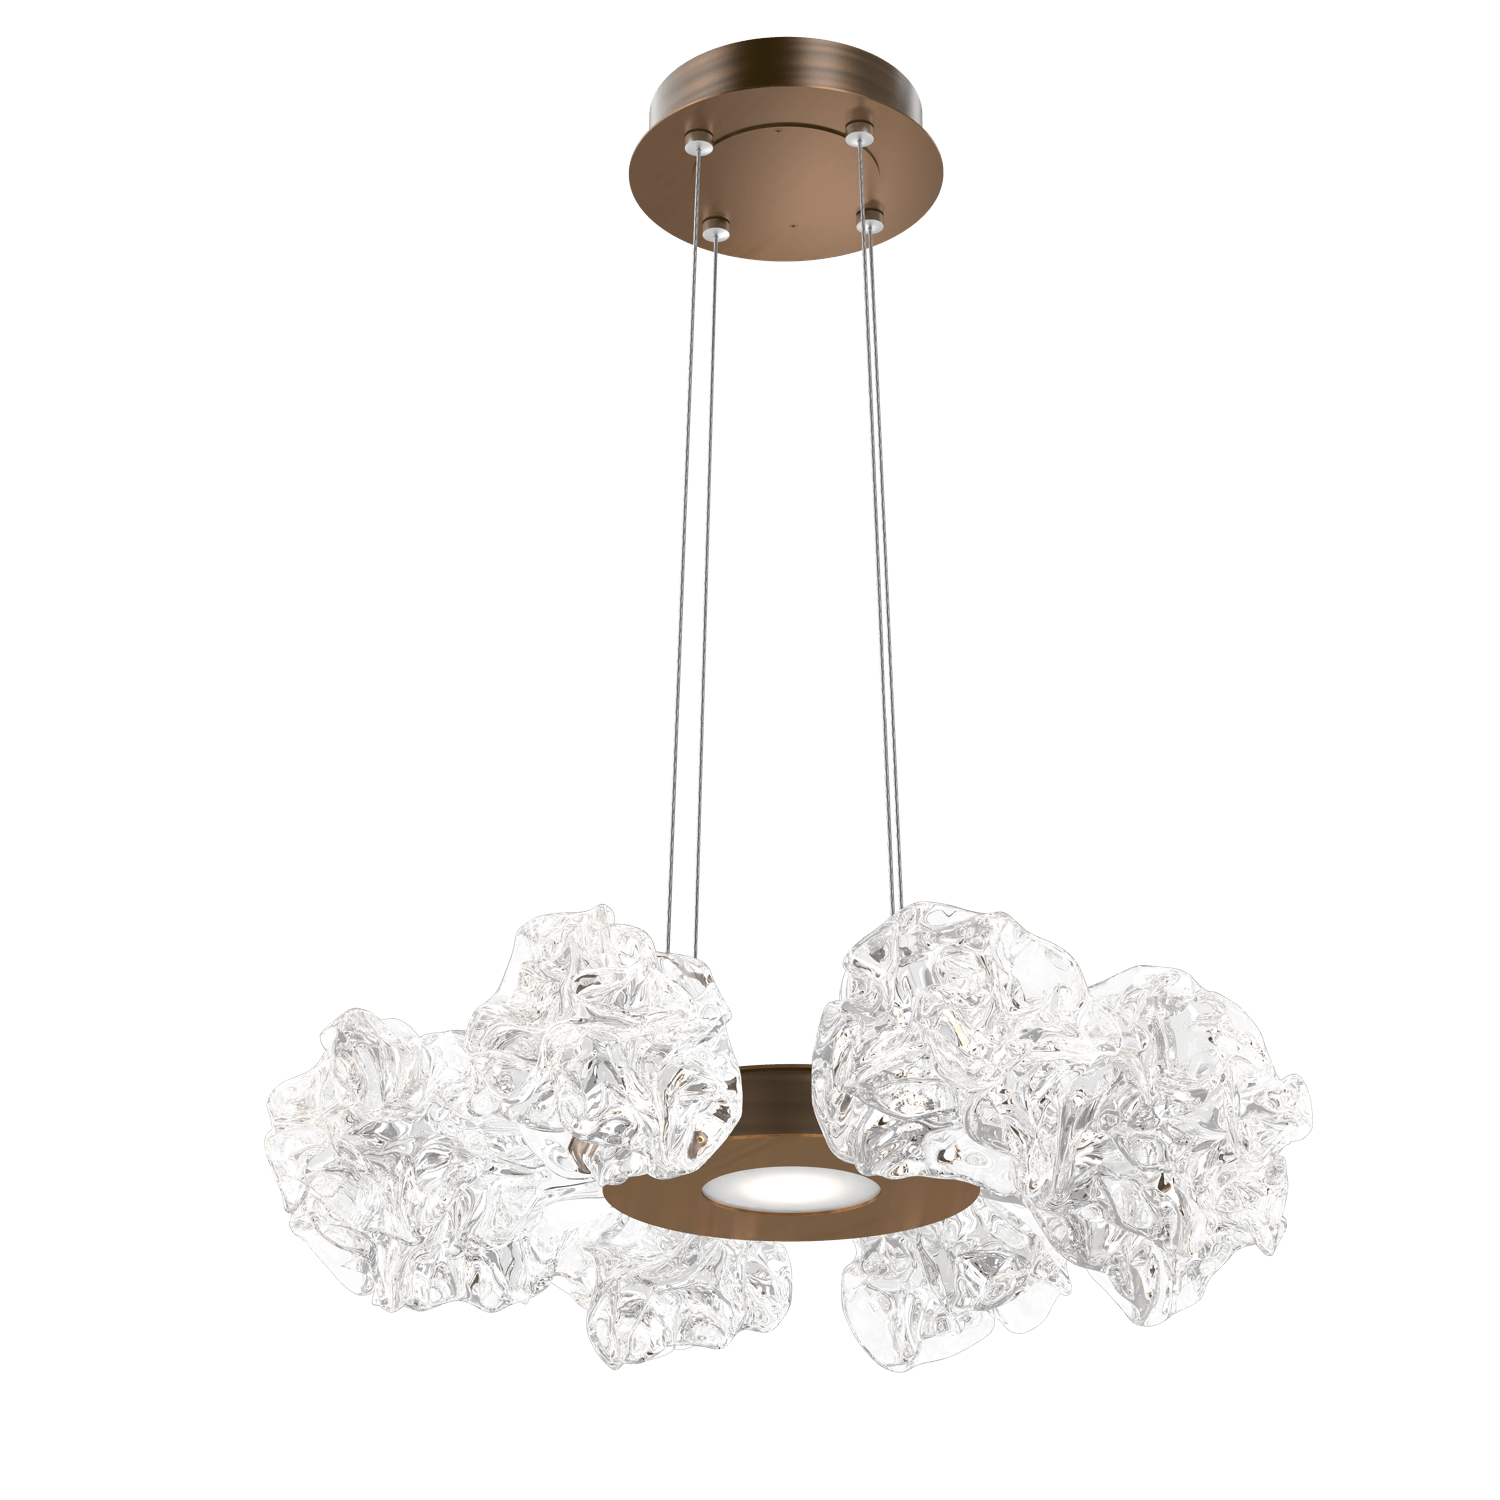 CHB0059-24-RB-Hammerton-Studio-Blossom-24-inch-radial-ring-chandelier-with-oil-rubbed-bronze-finish-and-clear-handblown-crystal-glass-shades-and-LED-lamping